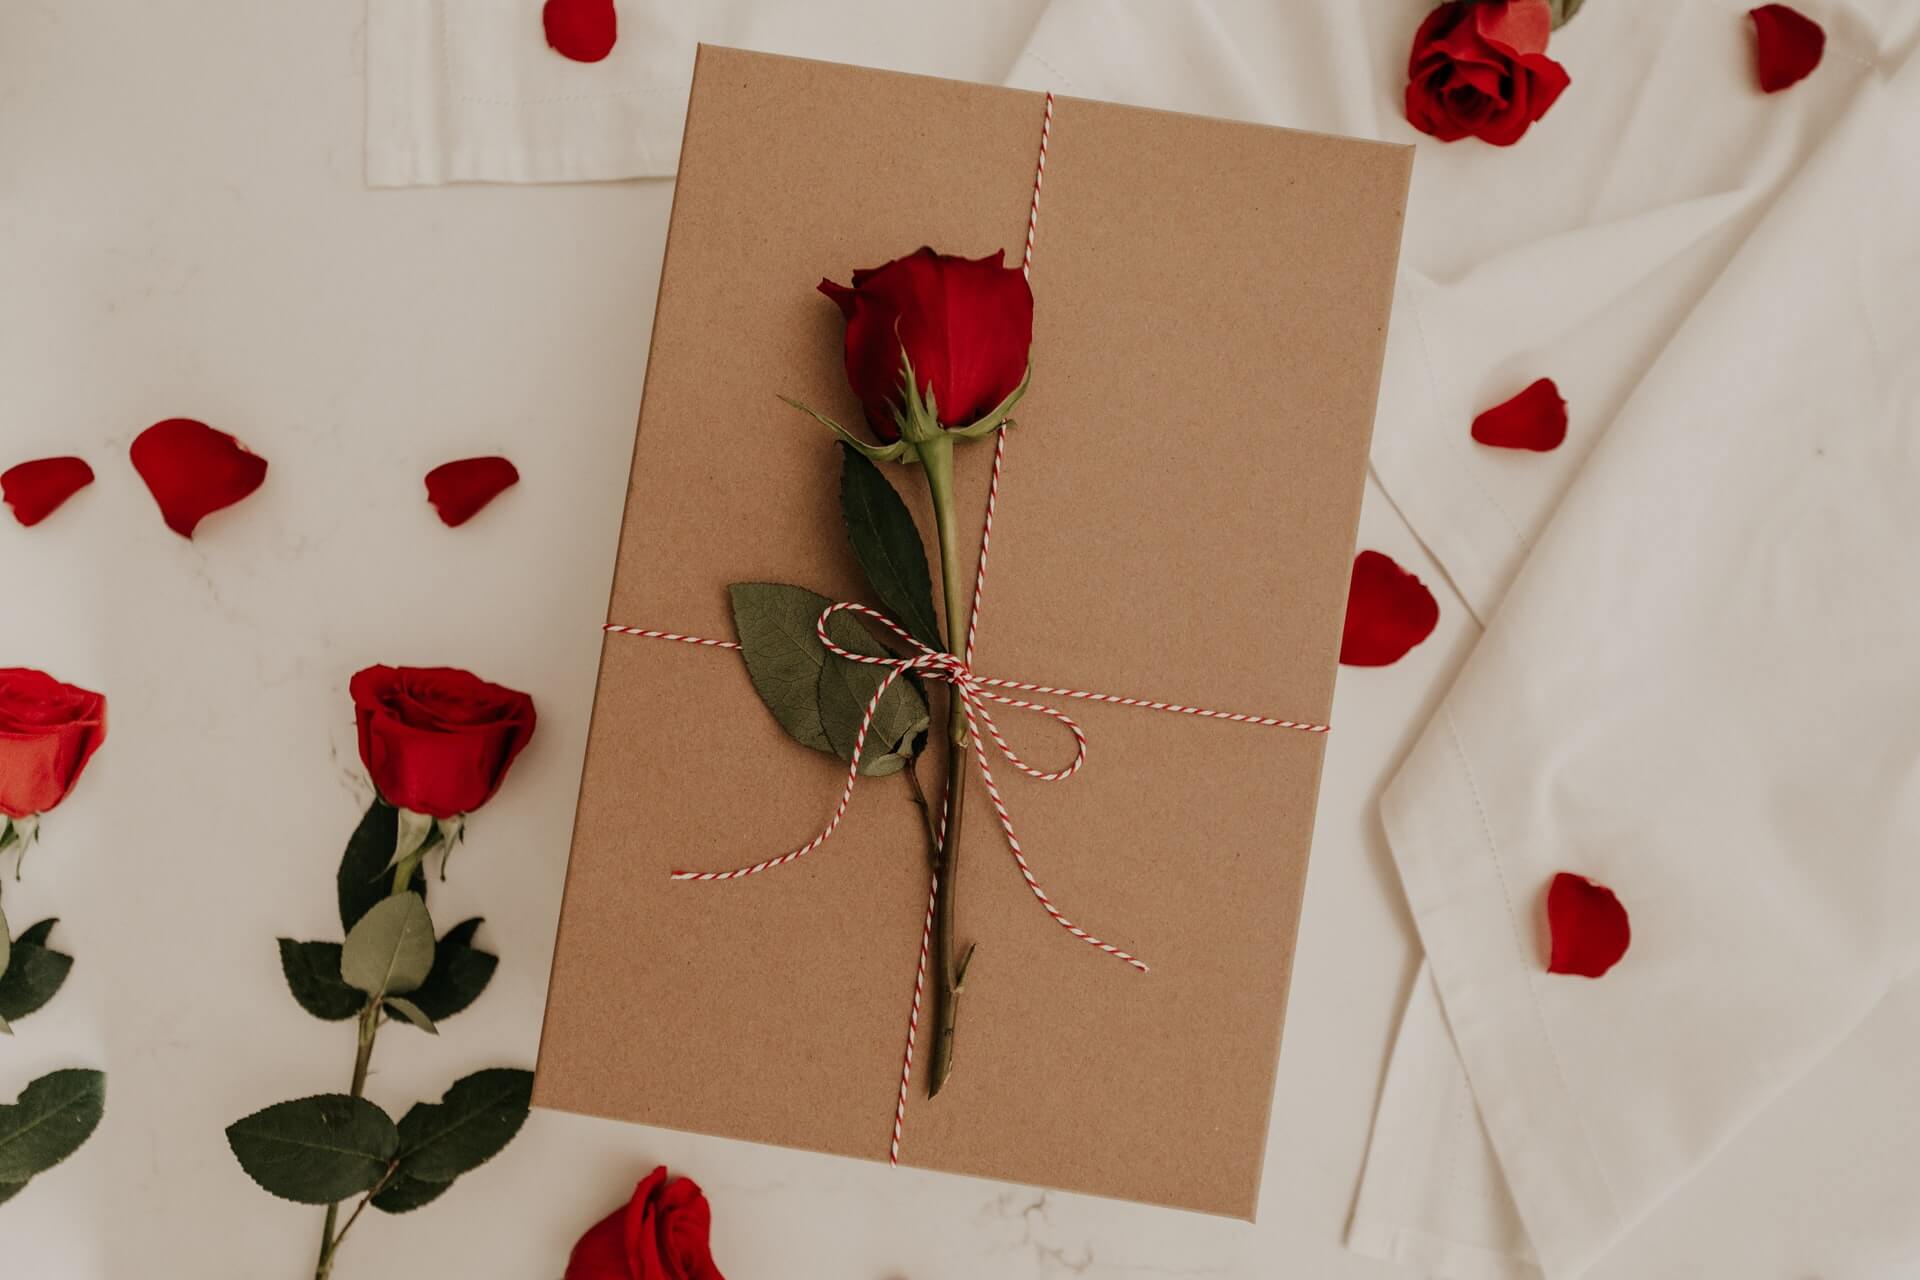 Gifts to Give for Your Loved Ones for the Month of Love